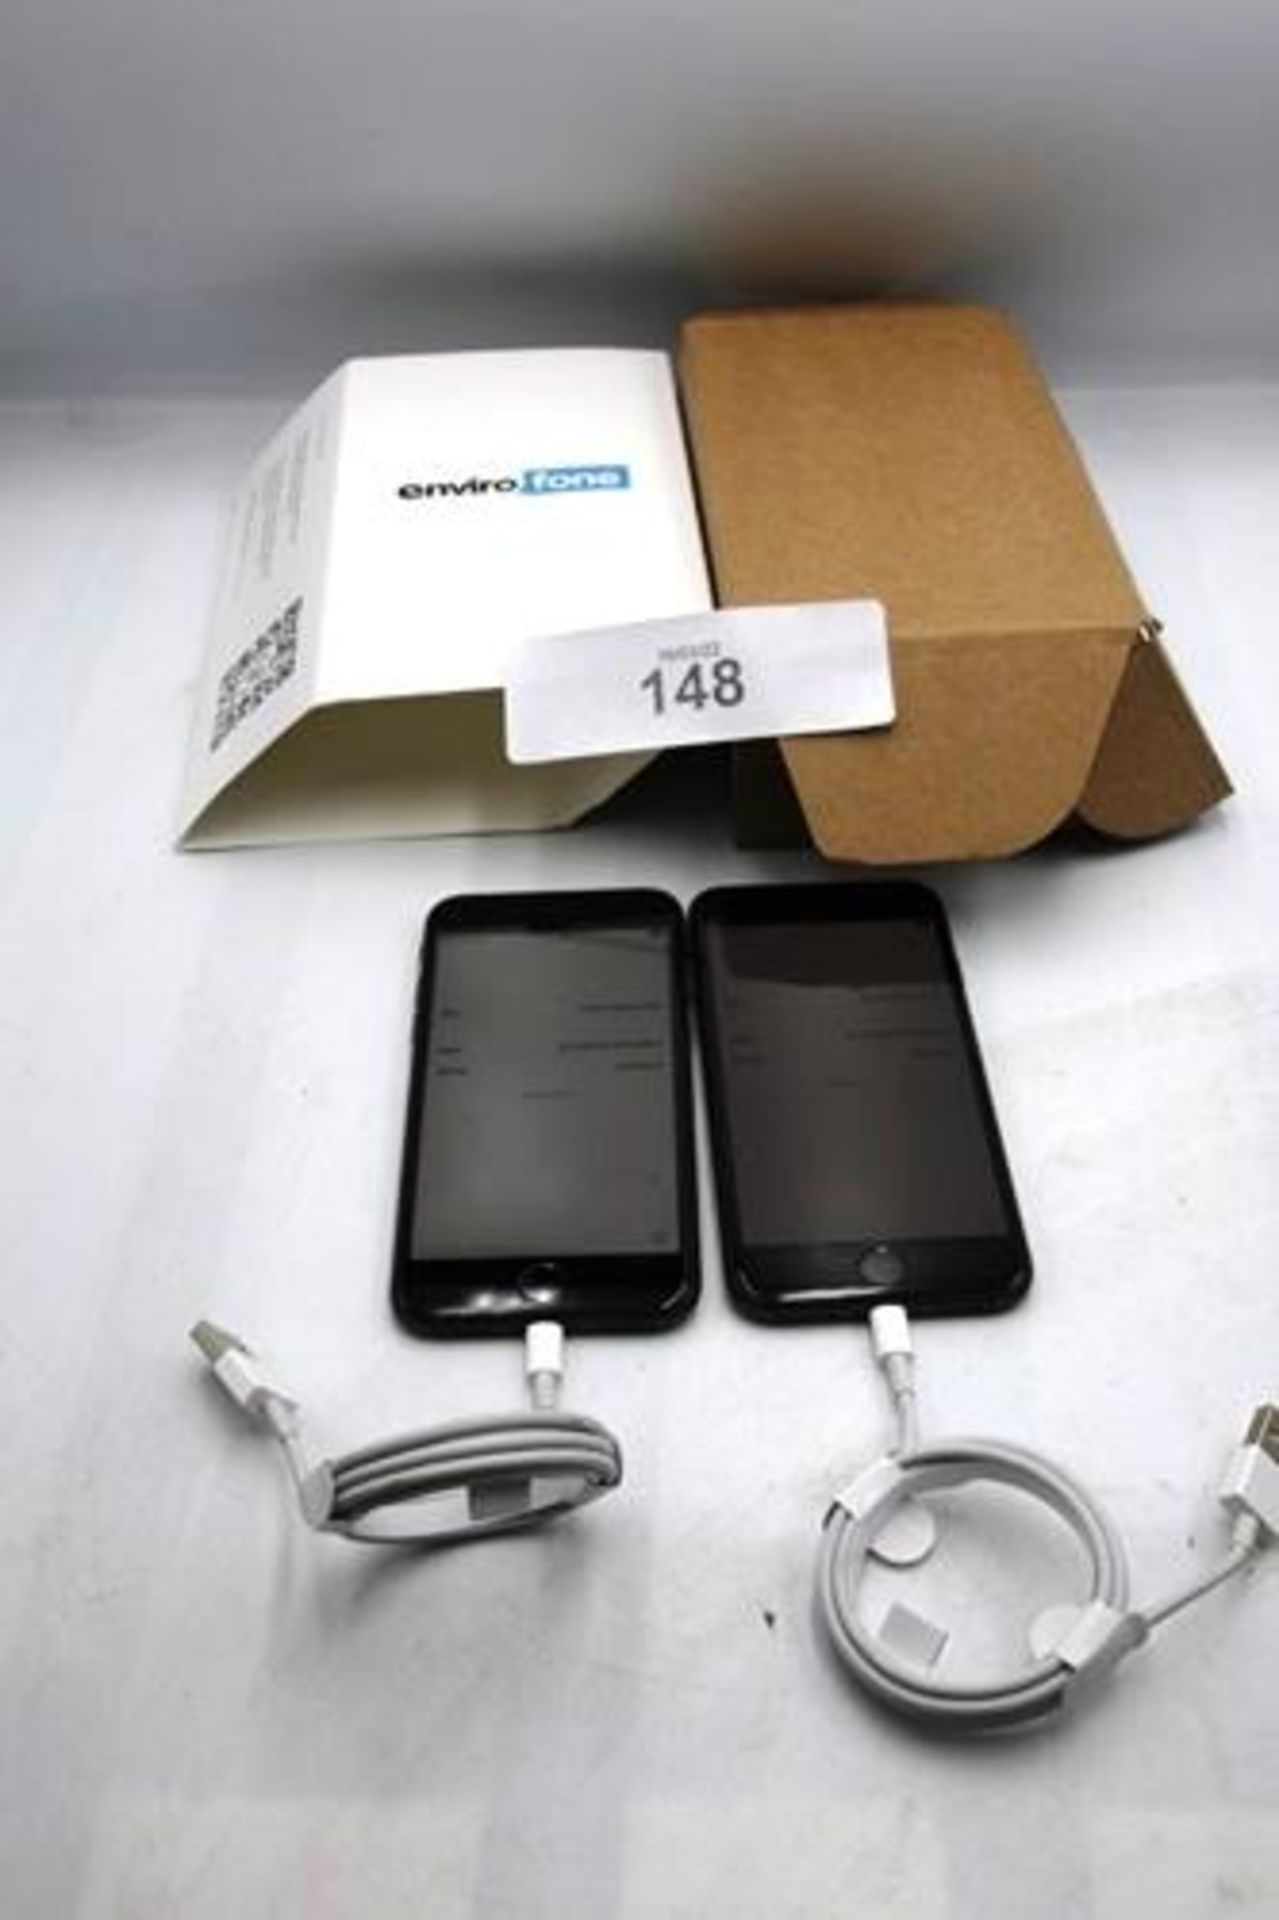 2 x black iPhone 8, 64gb, with charge cable. IMEI No's 3599496086475529 and 356761089702887, factory